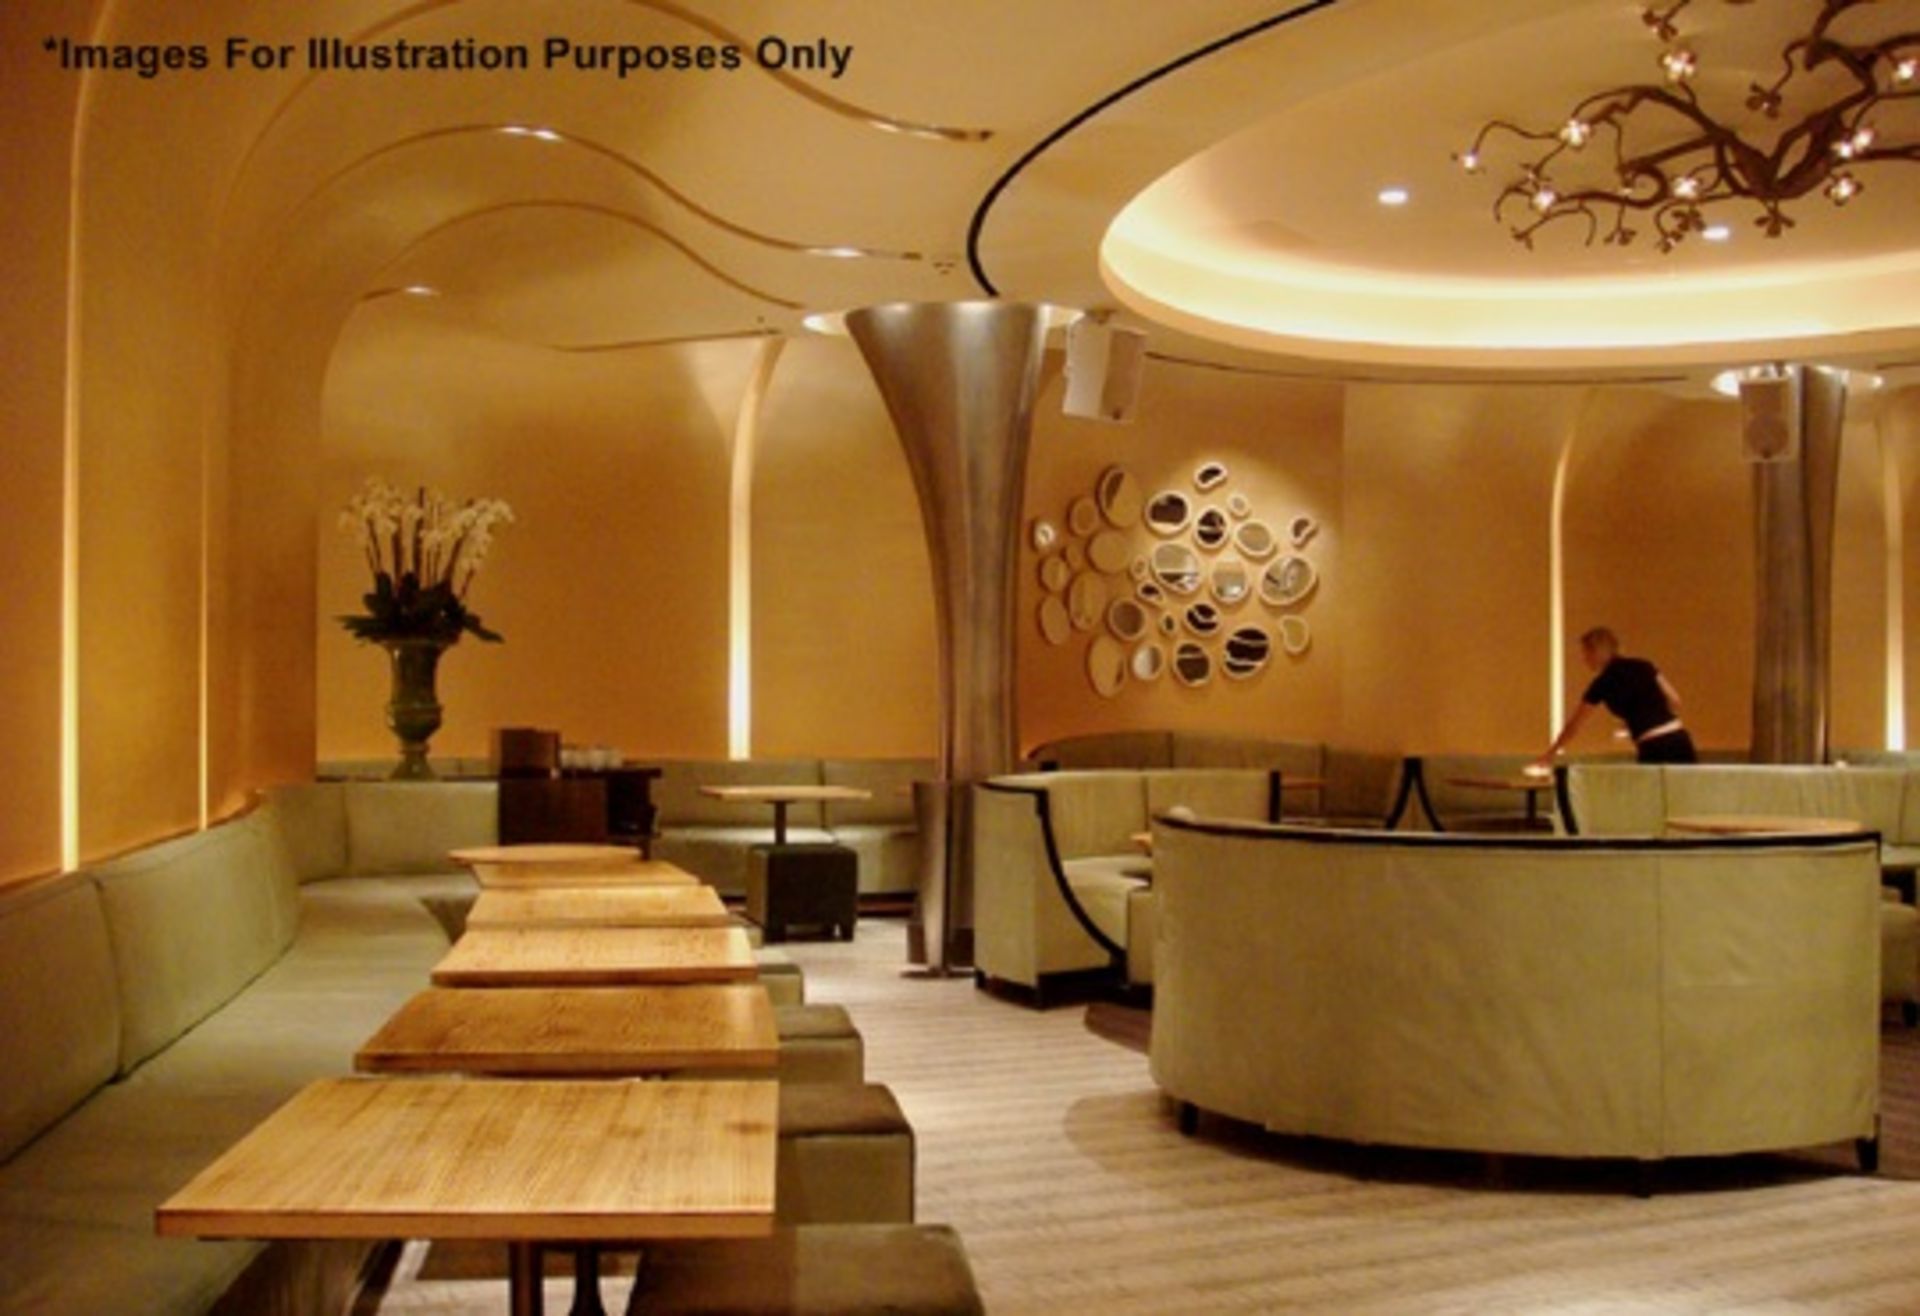 1 x Luxury Upholstered Curved Seating Area - Recently Removed From Nobu - Dimensions: W285 x D62cm x - Image 22 of 23